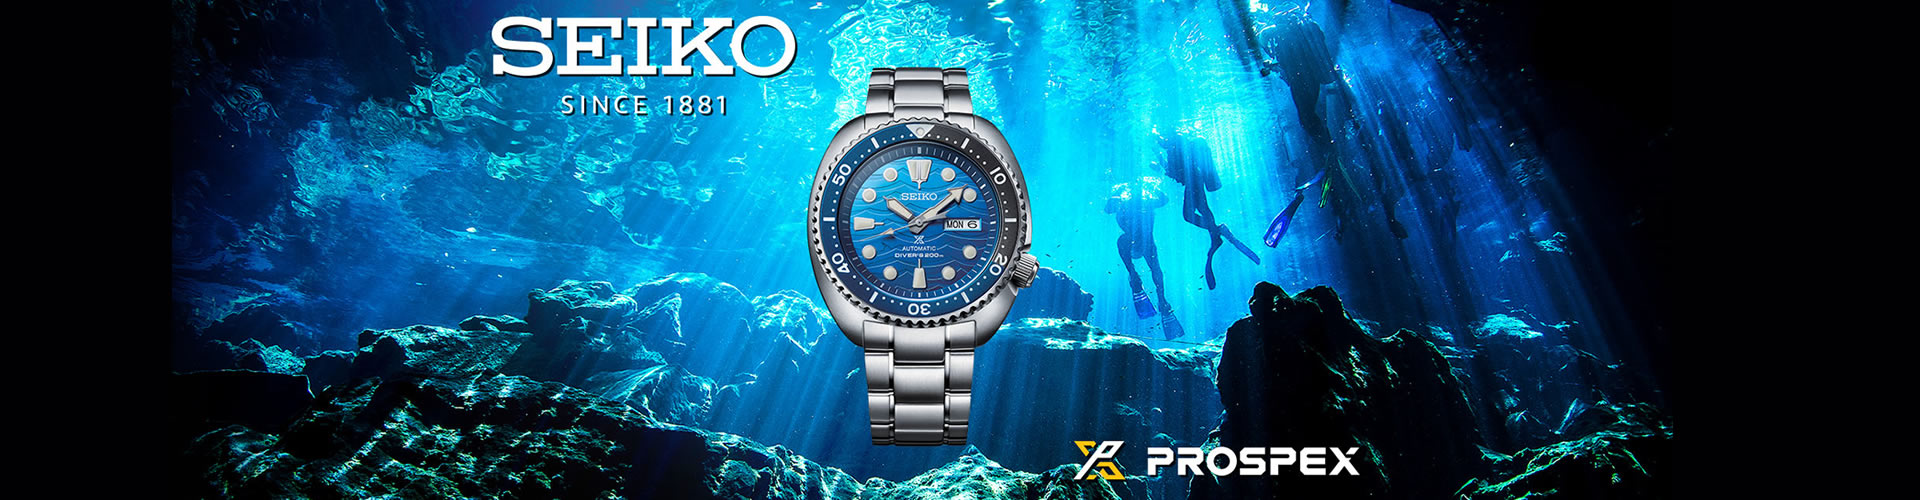 Seiko Watches | Material: Stainless Steel | Functions: 